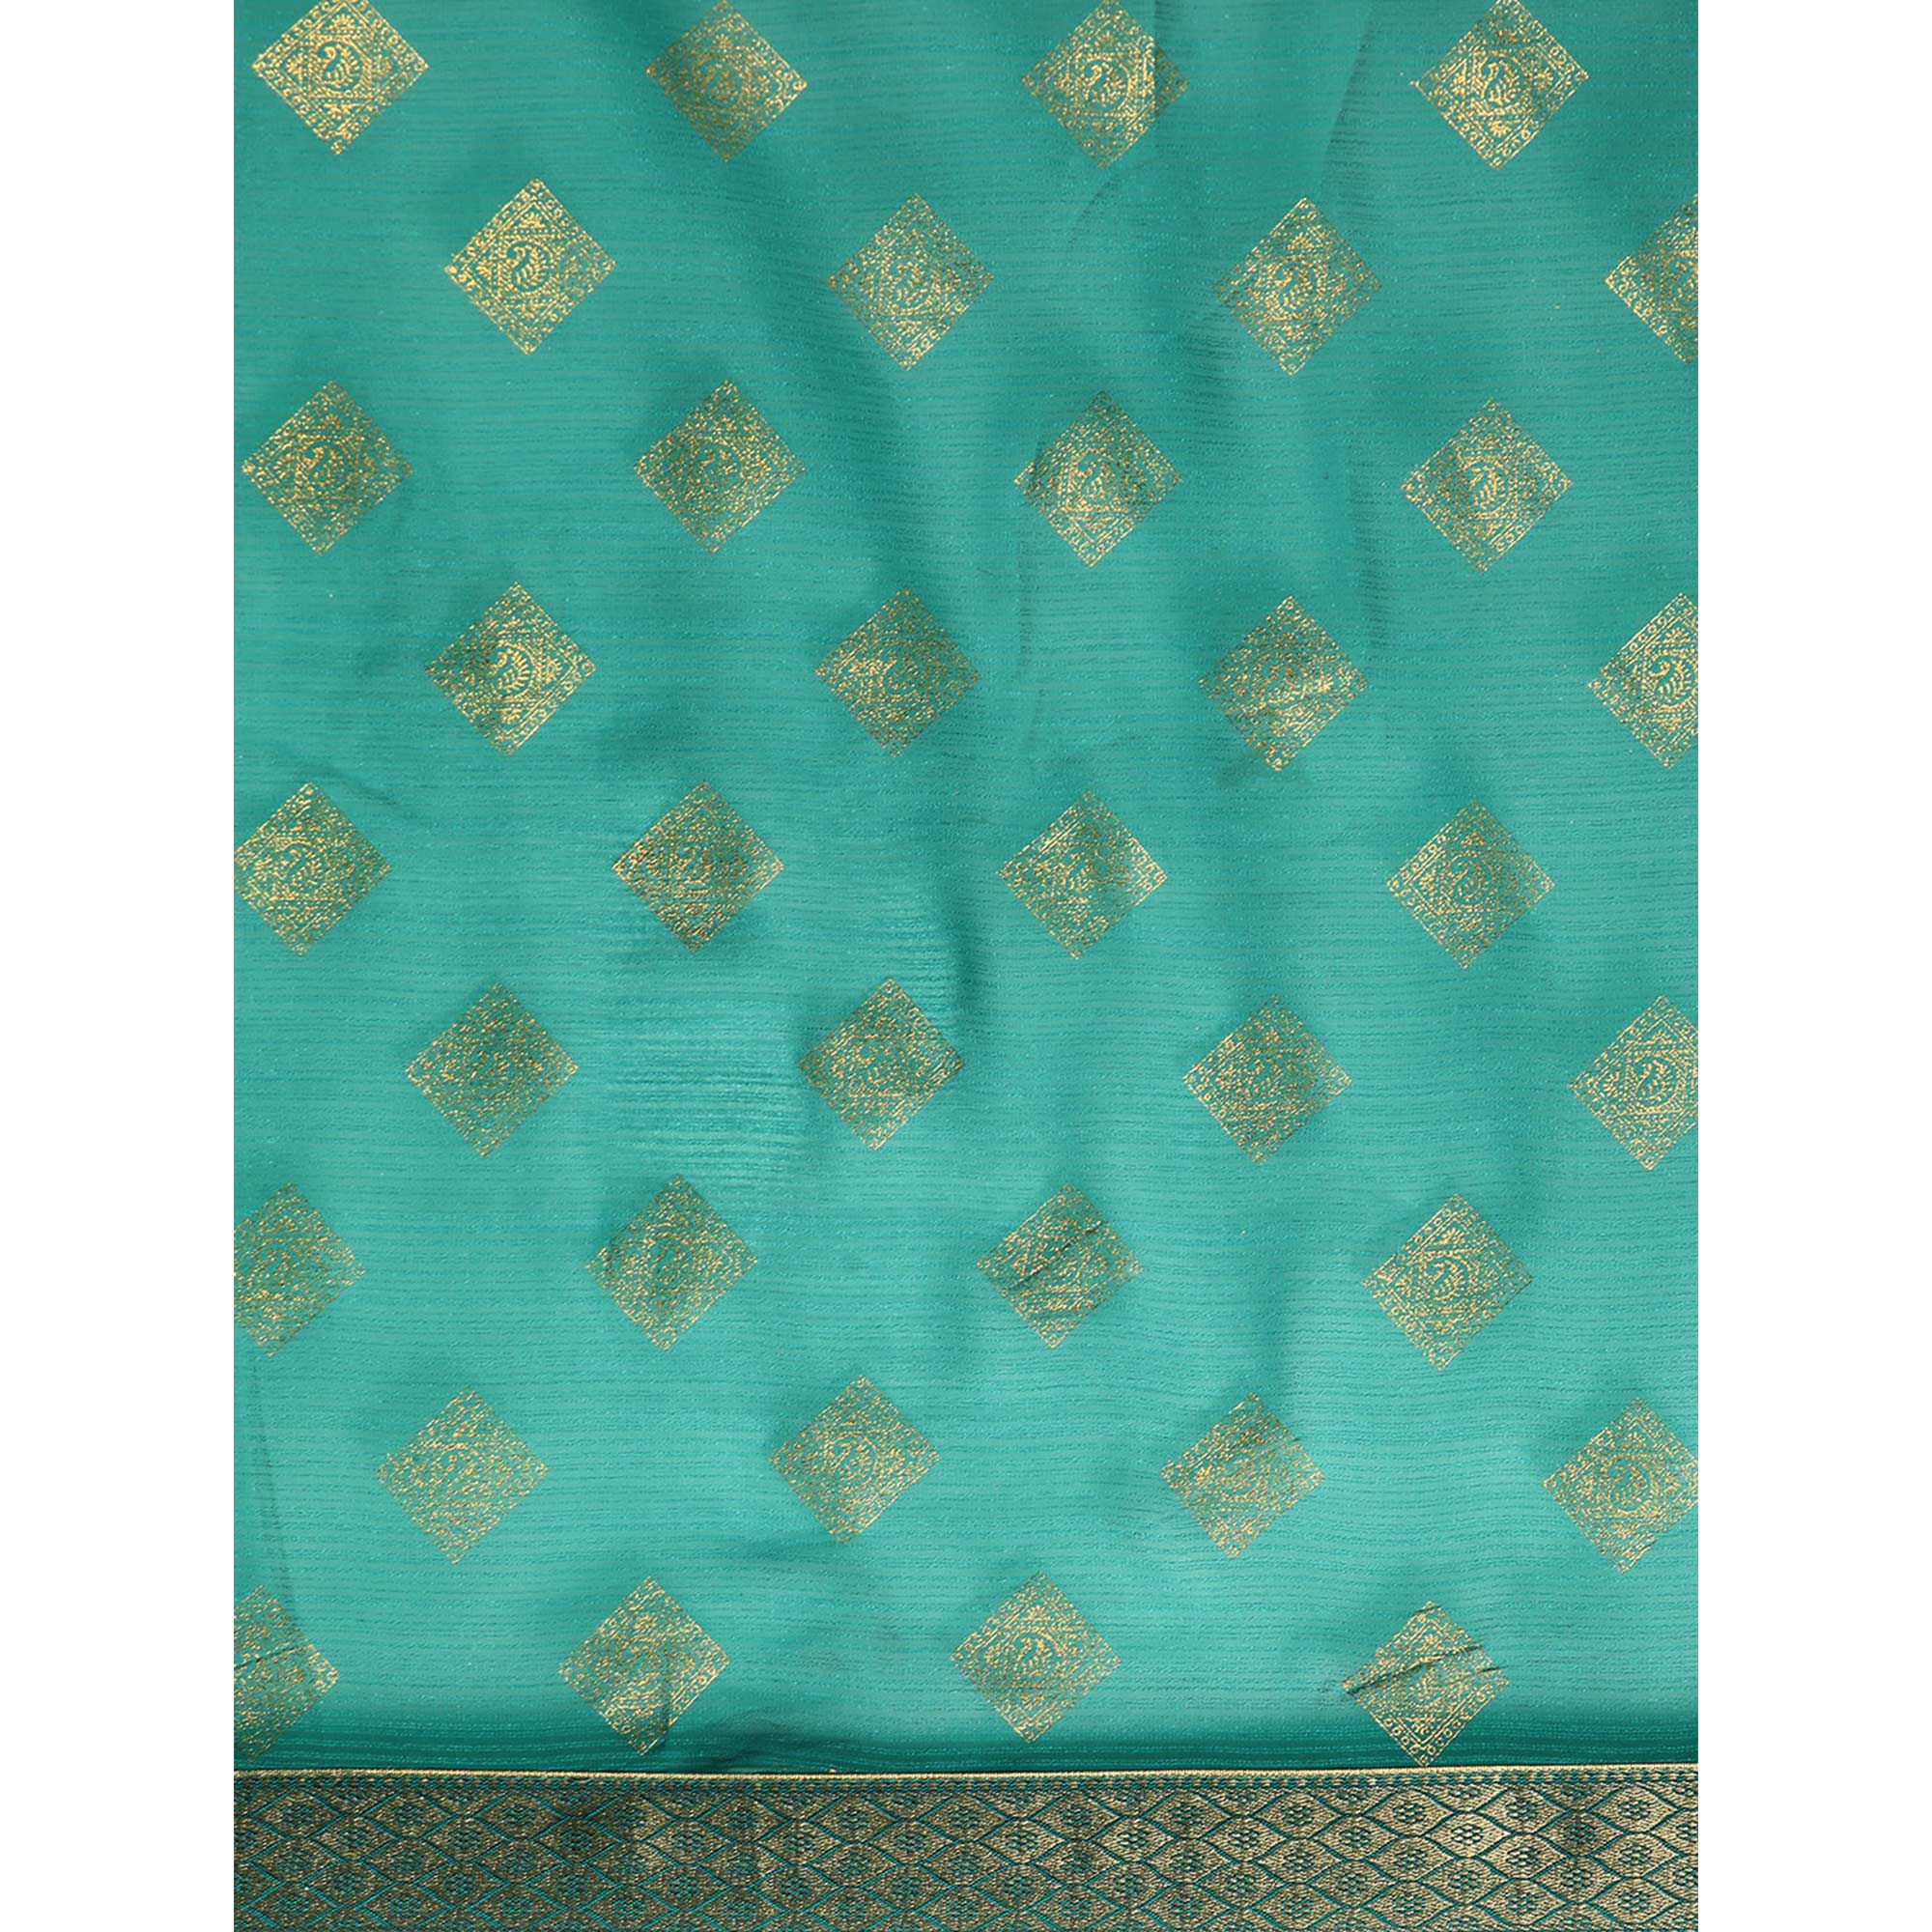 Turquoise Green Foil Printed Chiffon Saree With Tassels